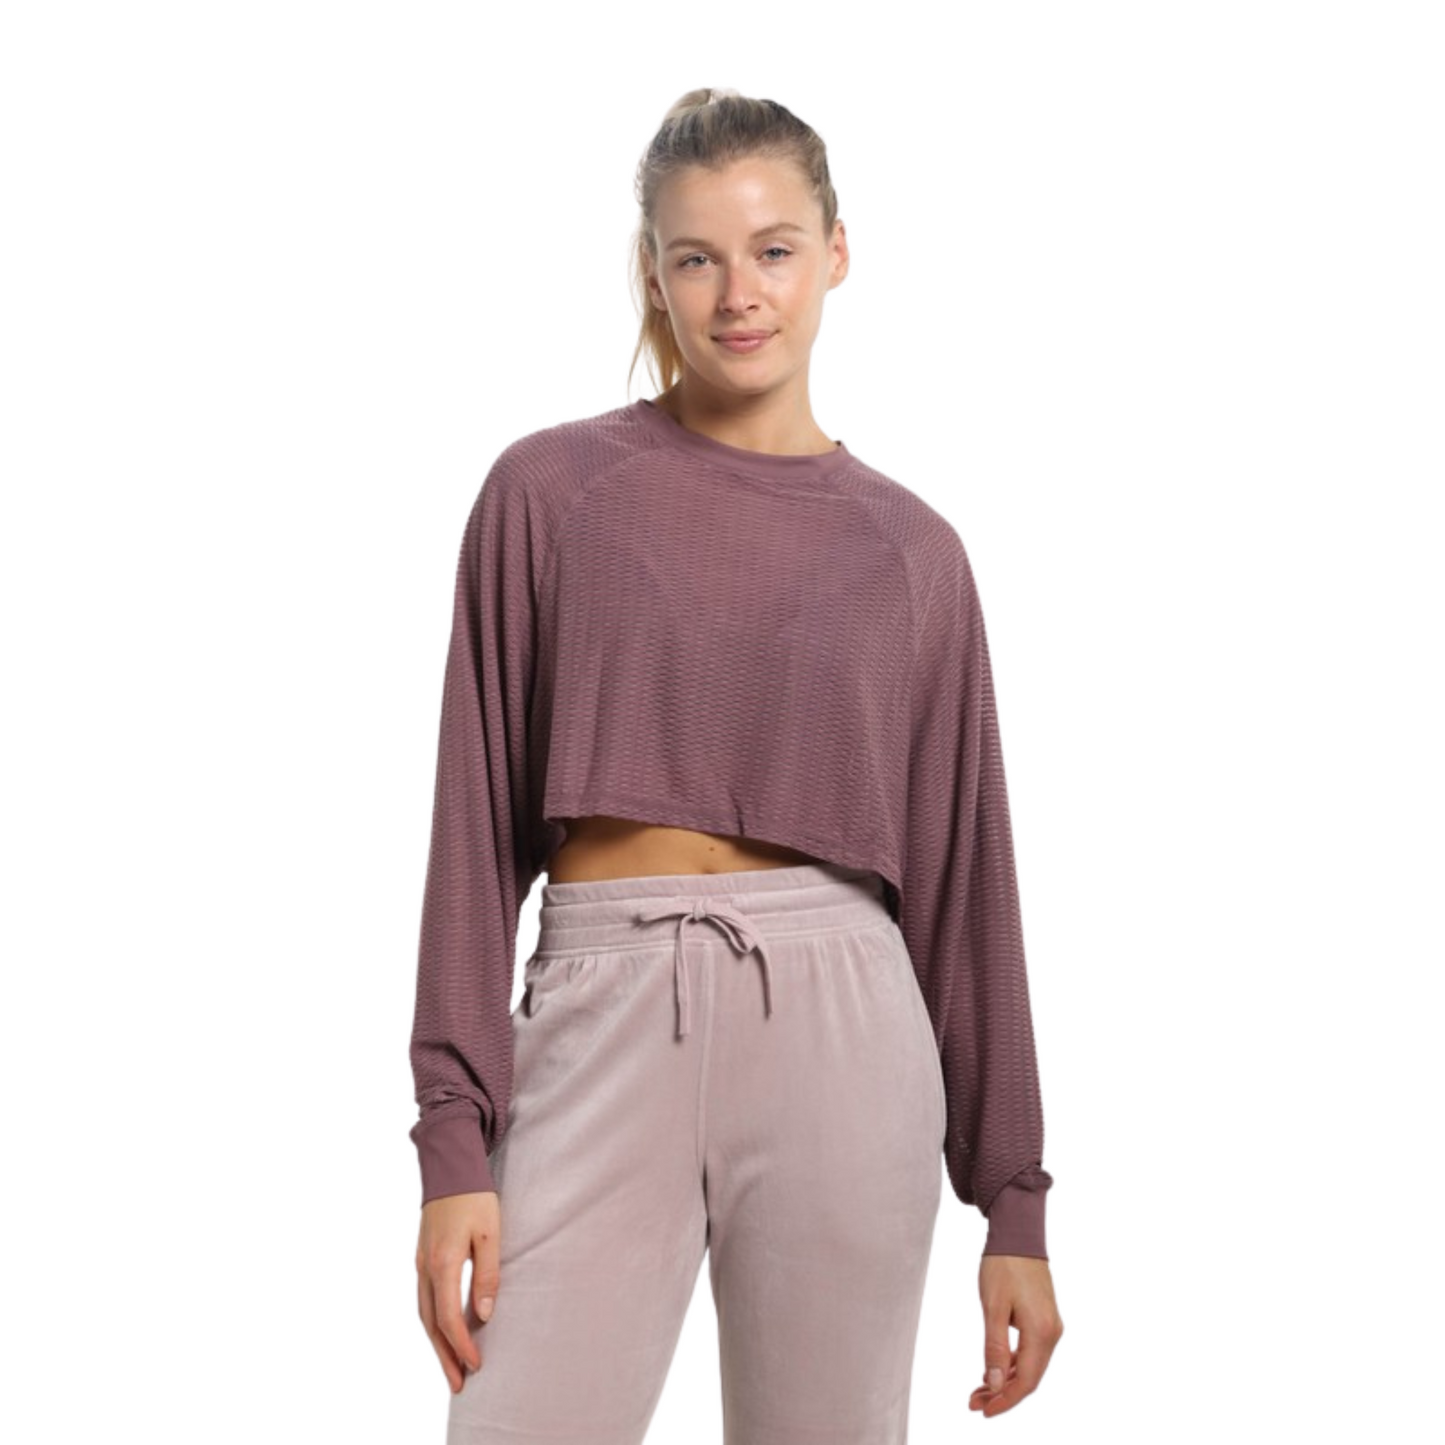 Our Mesh Raglan Cropped Top is a stylish addition to any wardrobe. This top comes in a cool sea green or mauve color with a cropped length and long sleeves. The breathable mesh fabric ensures all-day comfort.